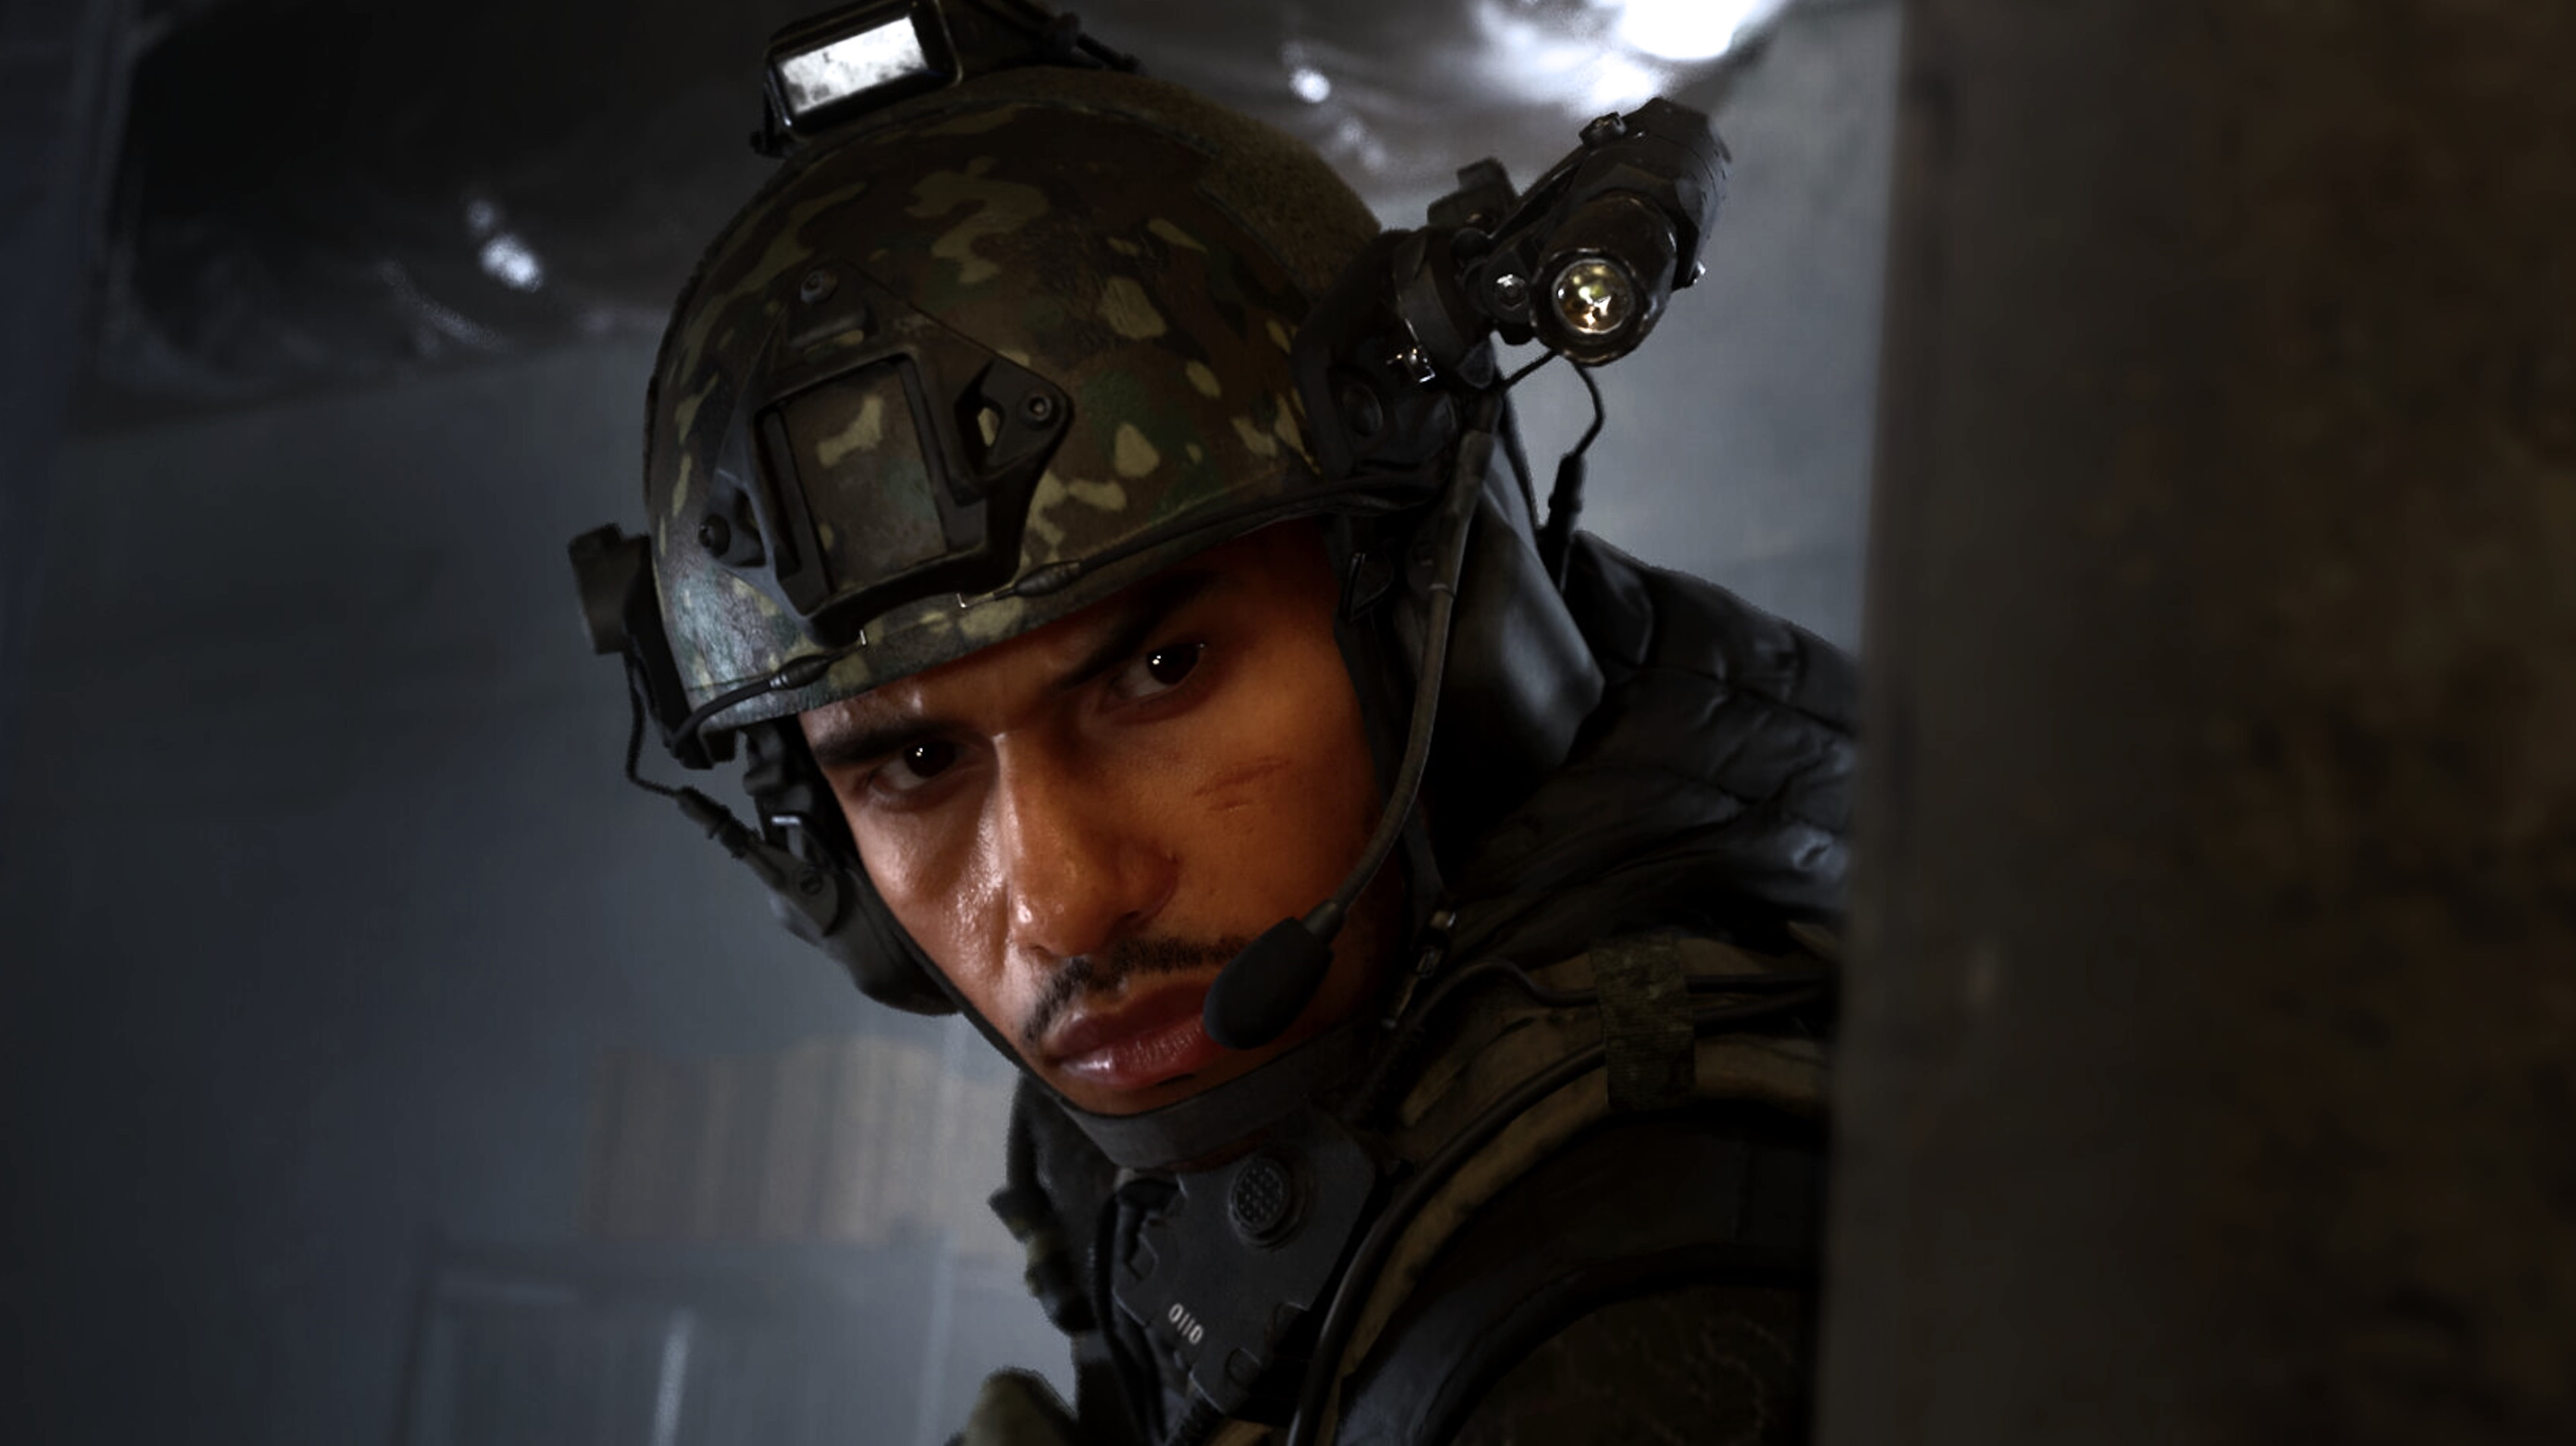 Call of Duty: 'Call of Duty: Modern Warfare 3': Here's PC system  requirements - The Economic Times